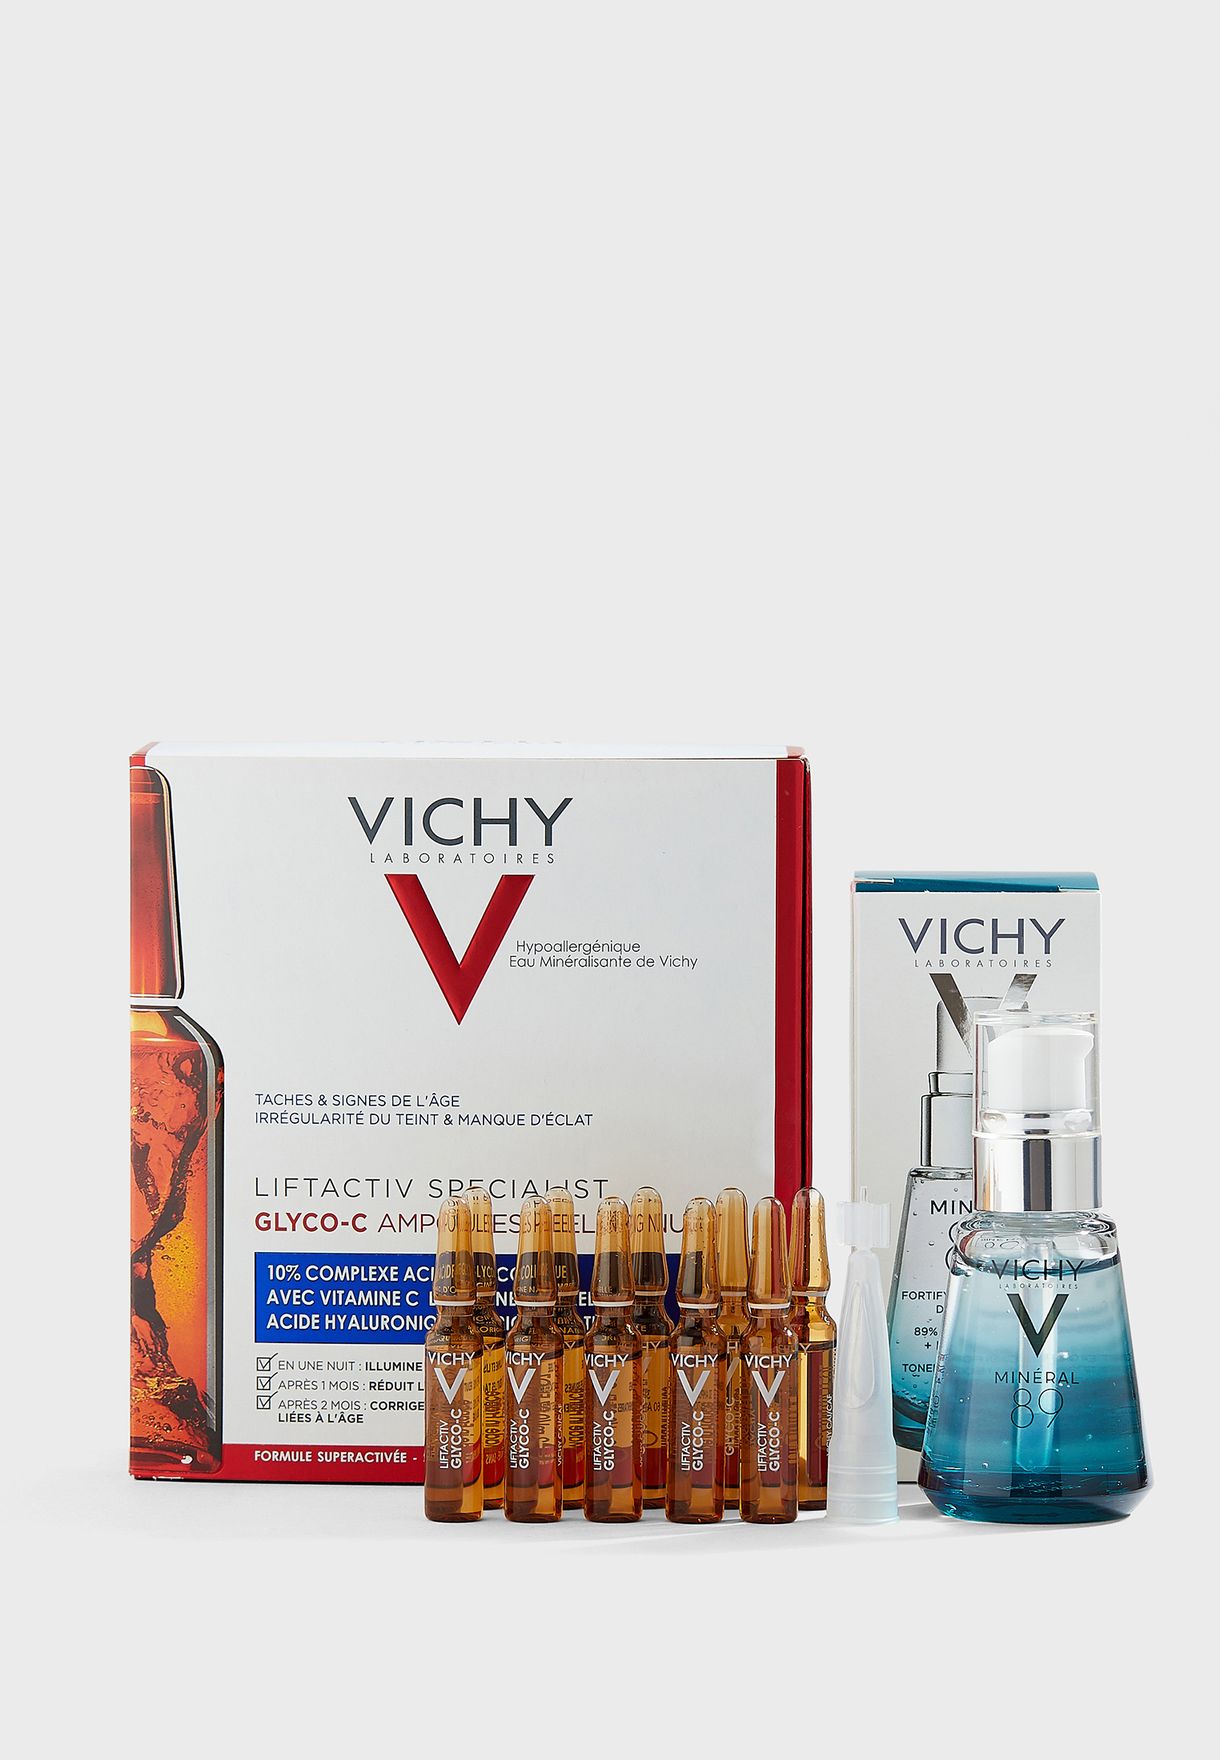 Liftactiv Glyco C 30 ampoules + Mineral 89 30ml Free (EXCLUSIVE)